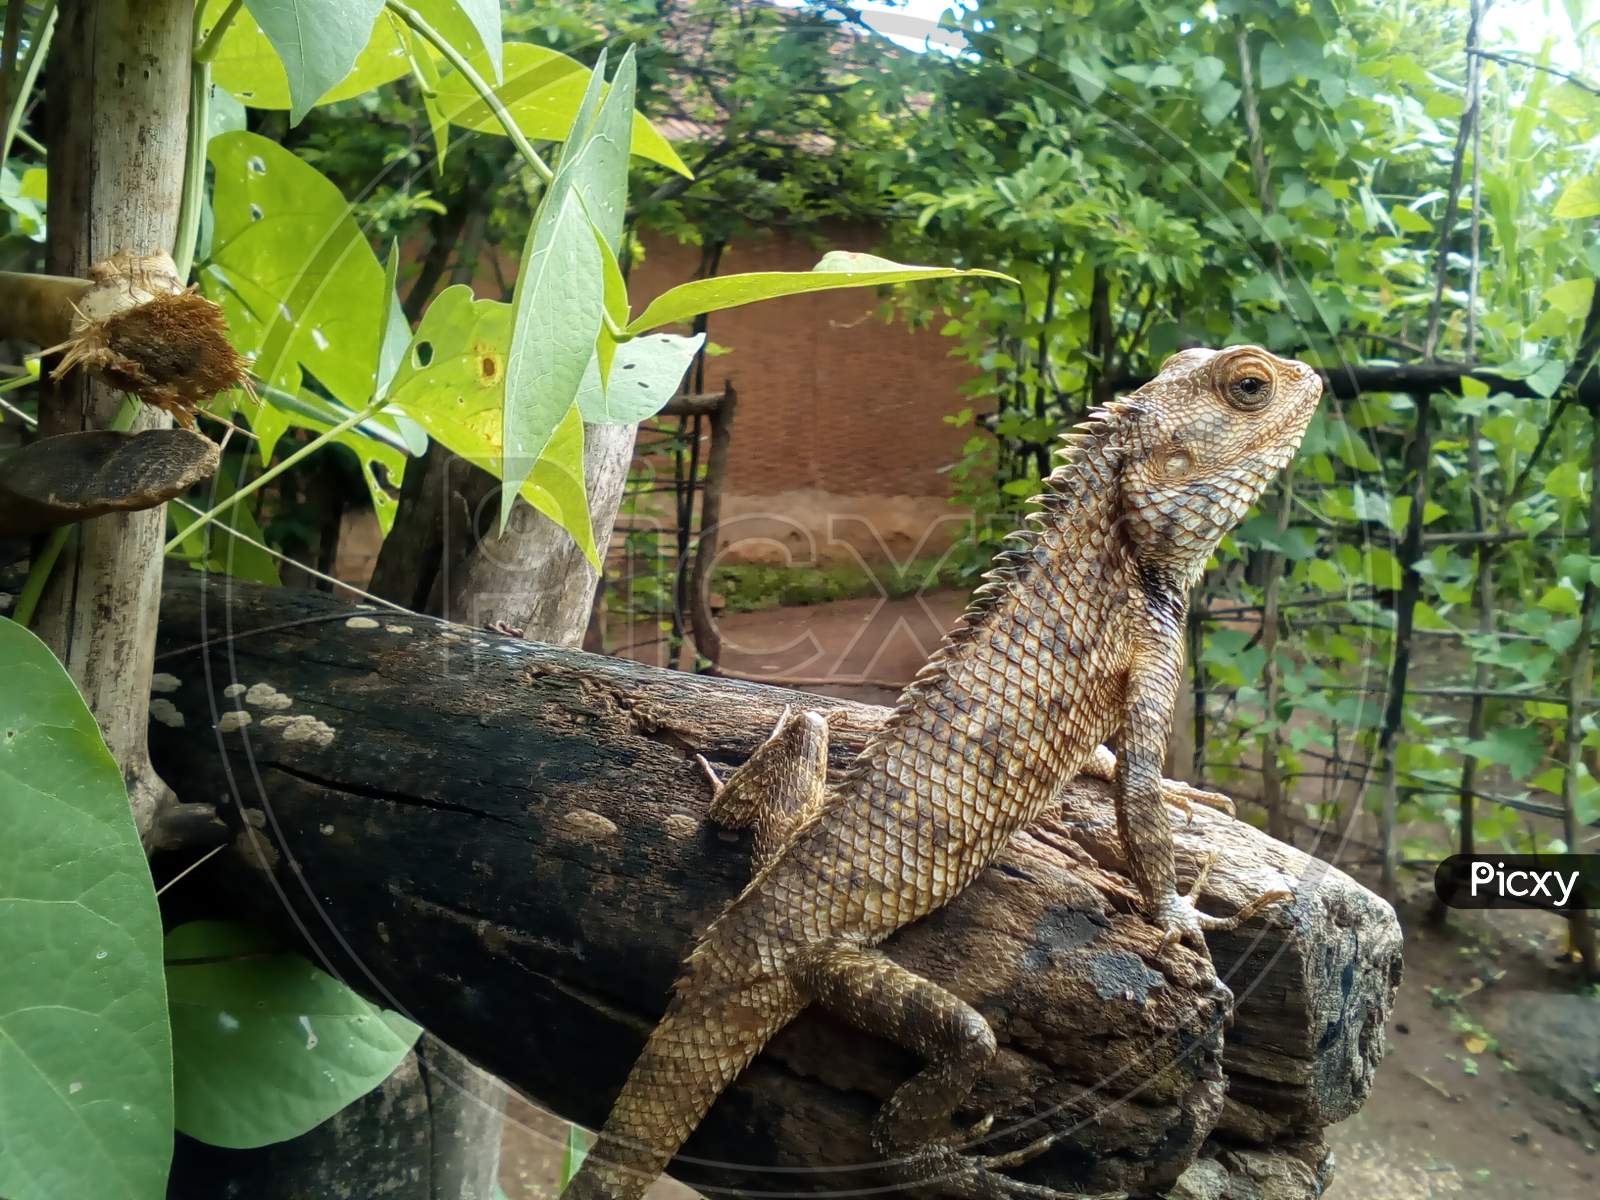 Lizard perched on wood